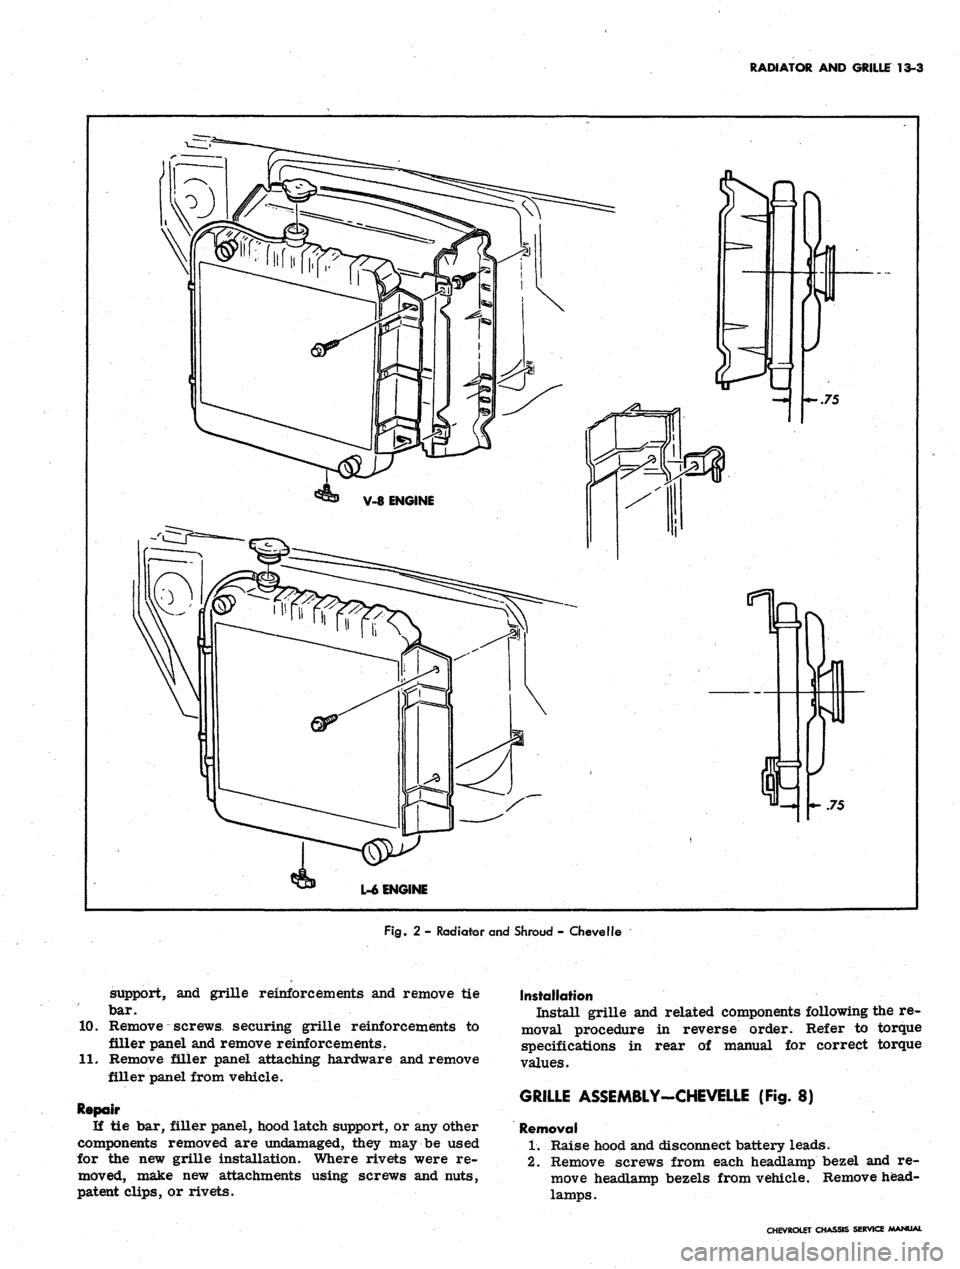 CHEVROLET CAMARO 1967 1.G Chassis User Guide 
RADIATOR AND GRILLE 13-3

Fig.
 2 - Radiator and Shroud - Chevelle

support, and grille reinforcements and remove tie

bar.

10.
 Remove screws securing grille reinforcements to

filler panel and rem